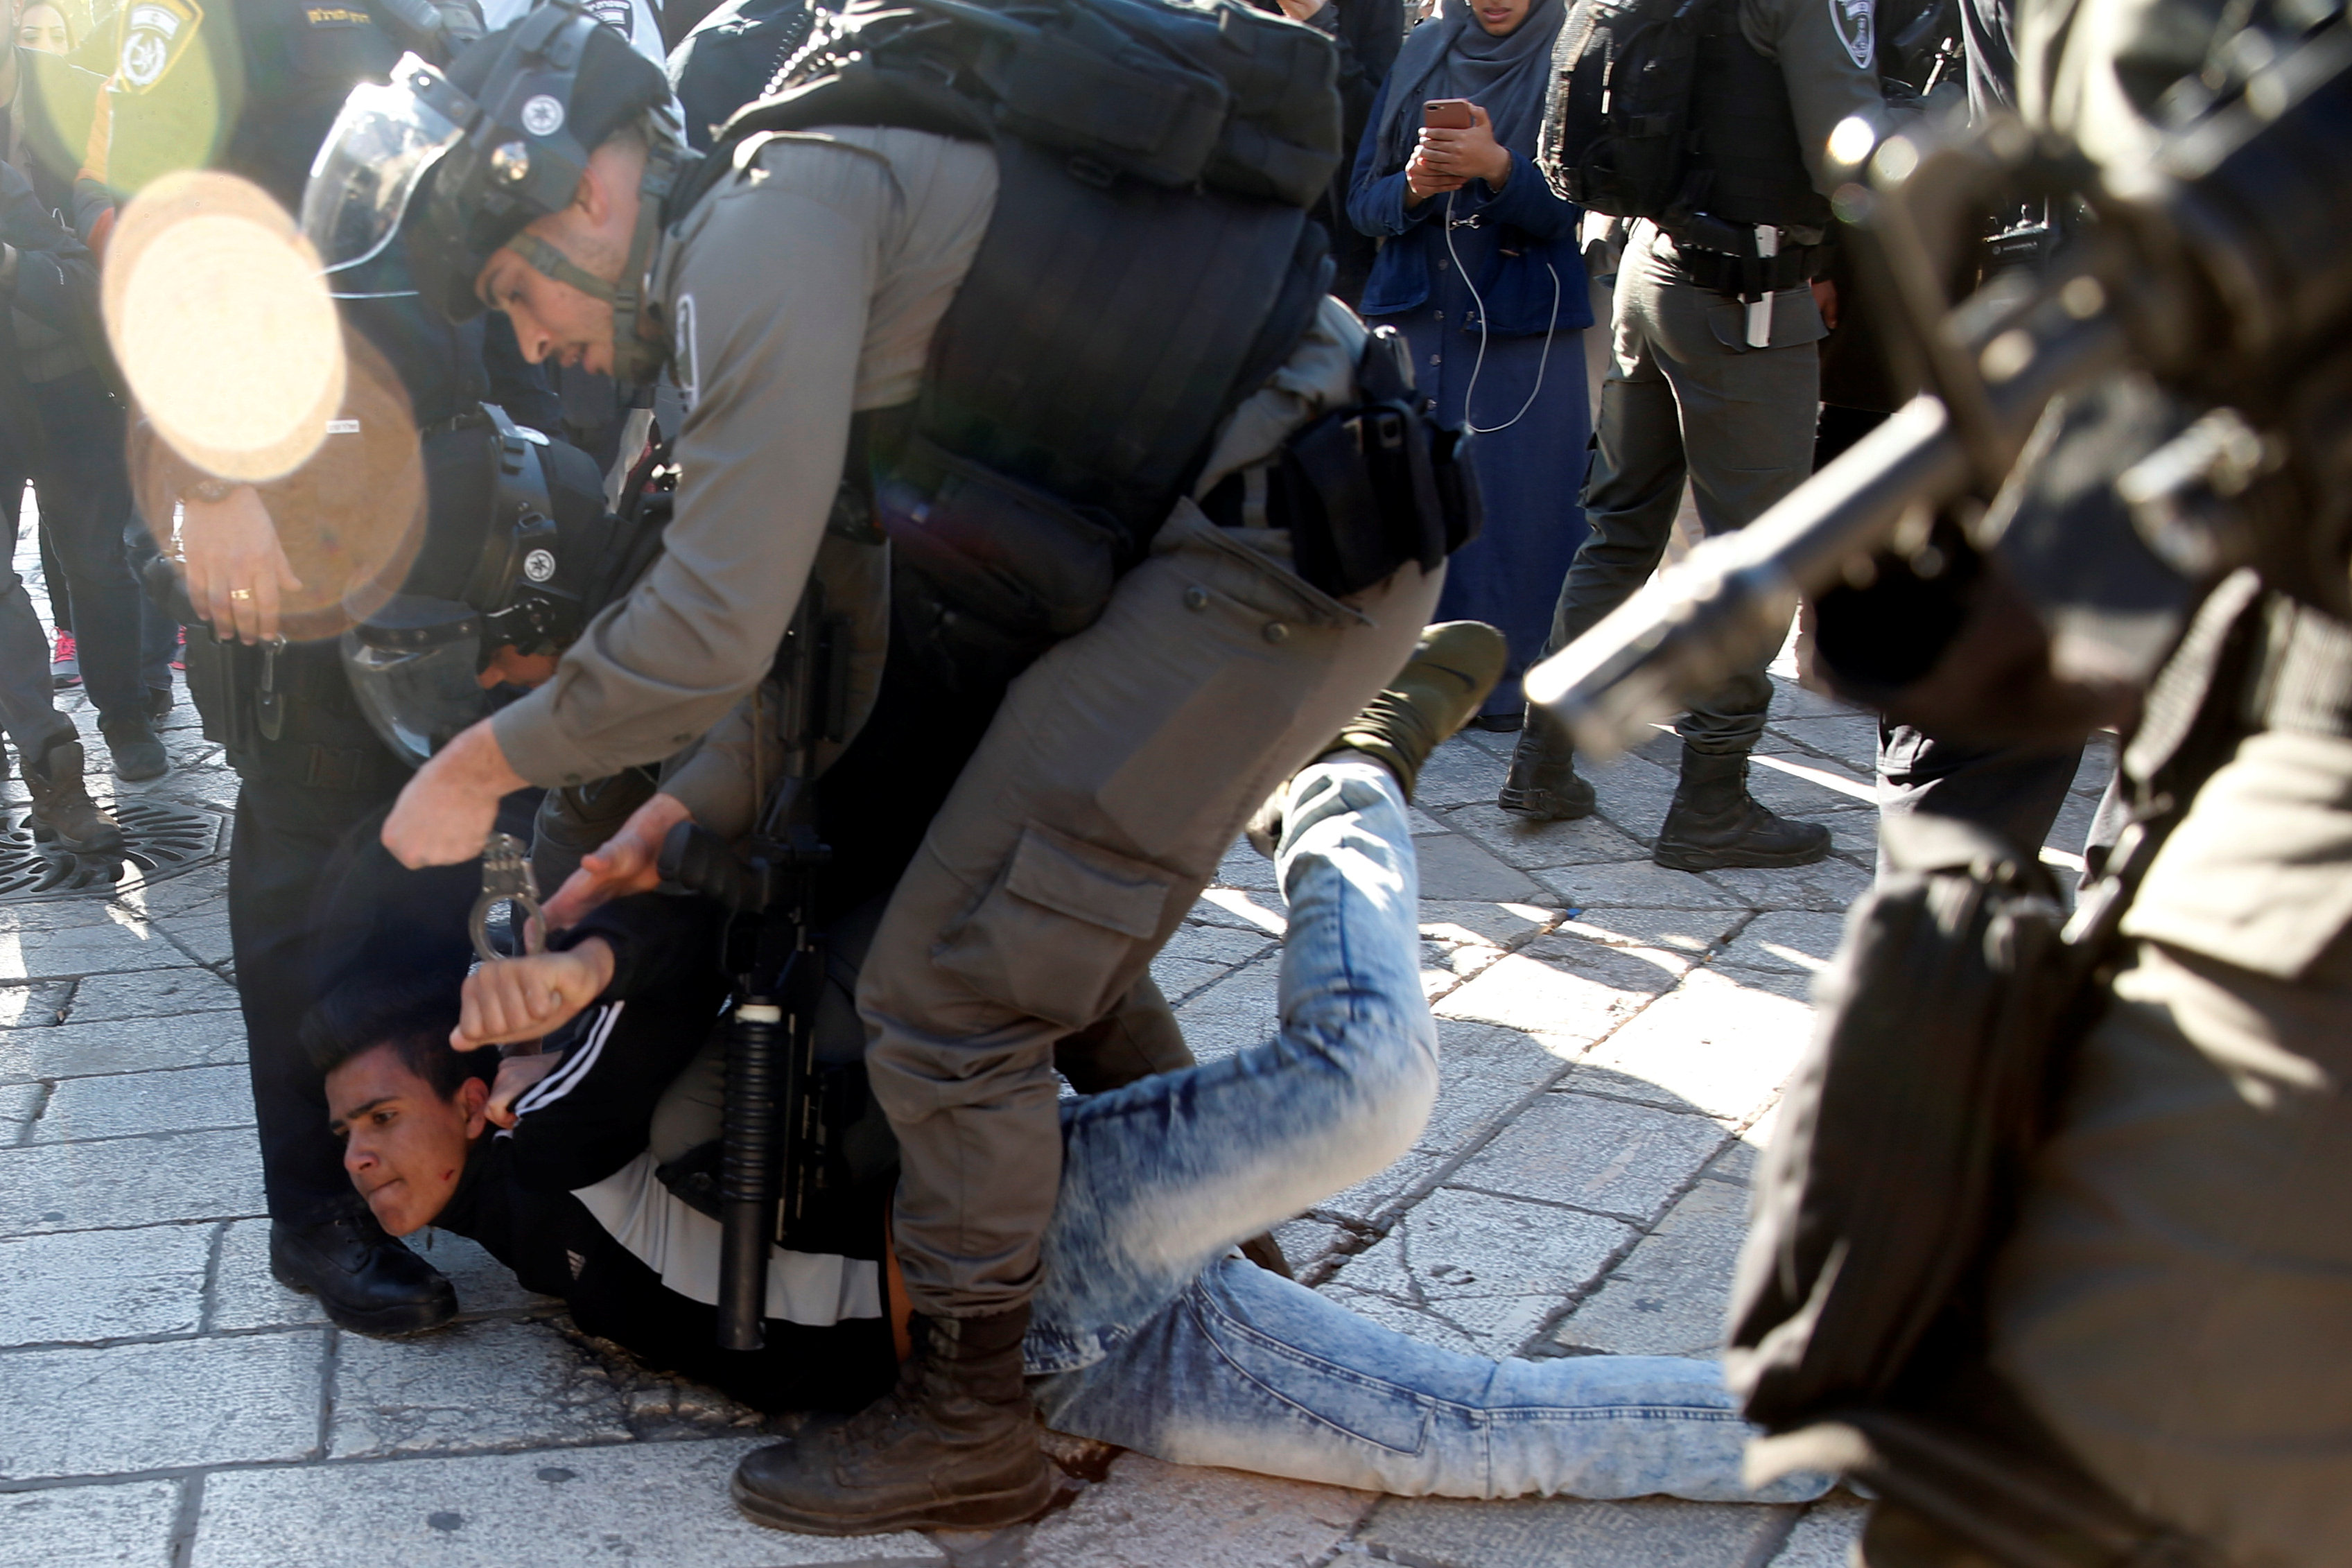 Israel uses force to disperse Palestinian protests